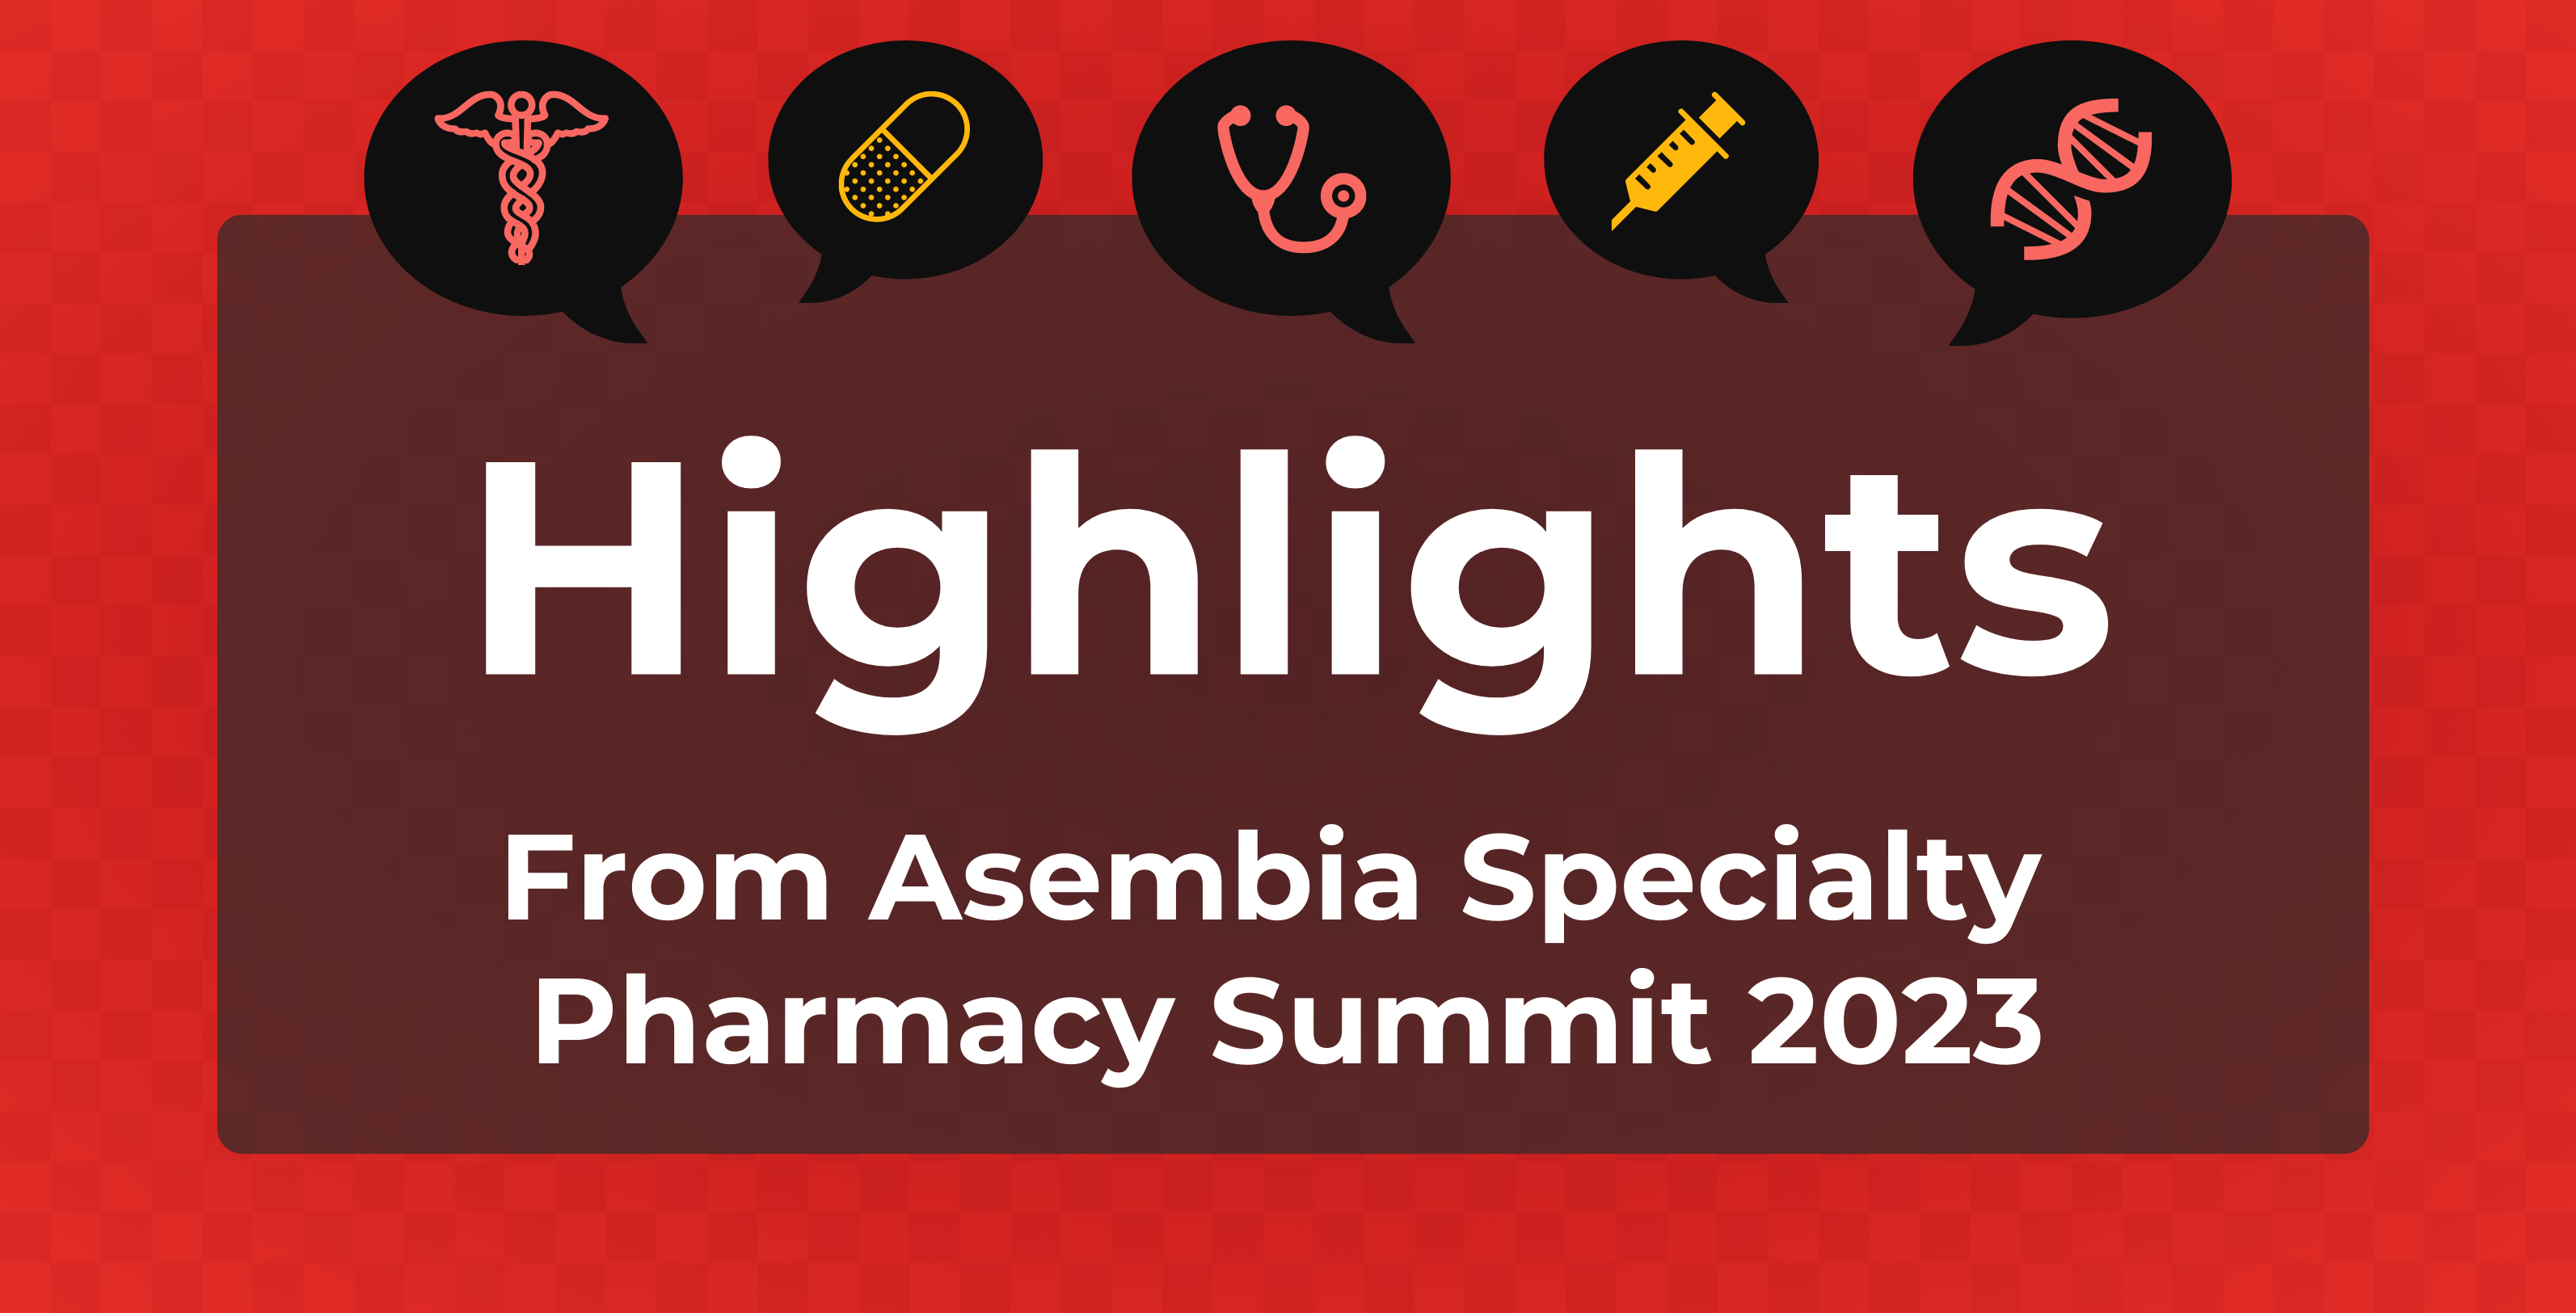 Highlights from Asembia Speciality Pharmacy Summit 2023